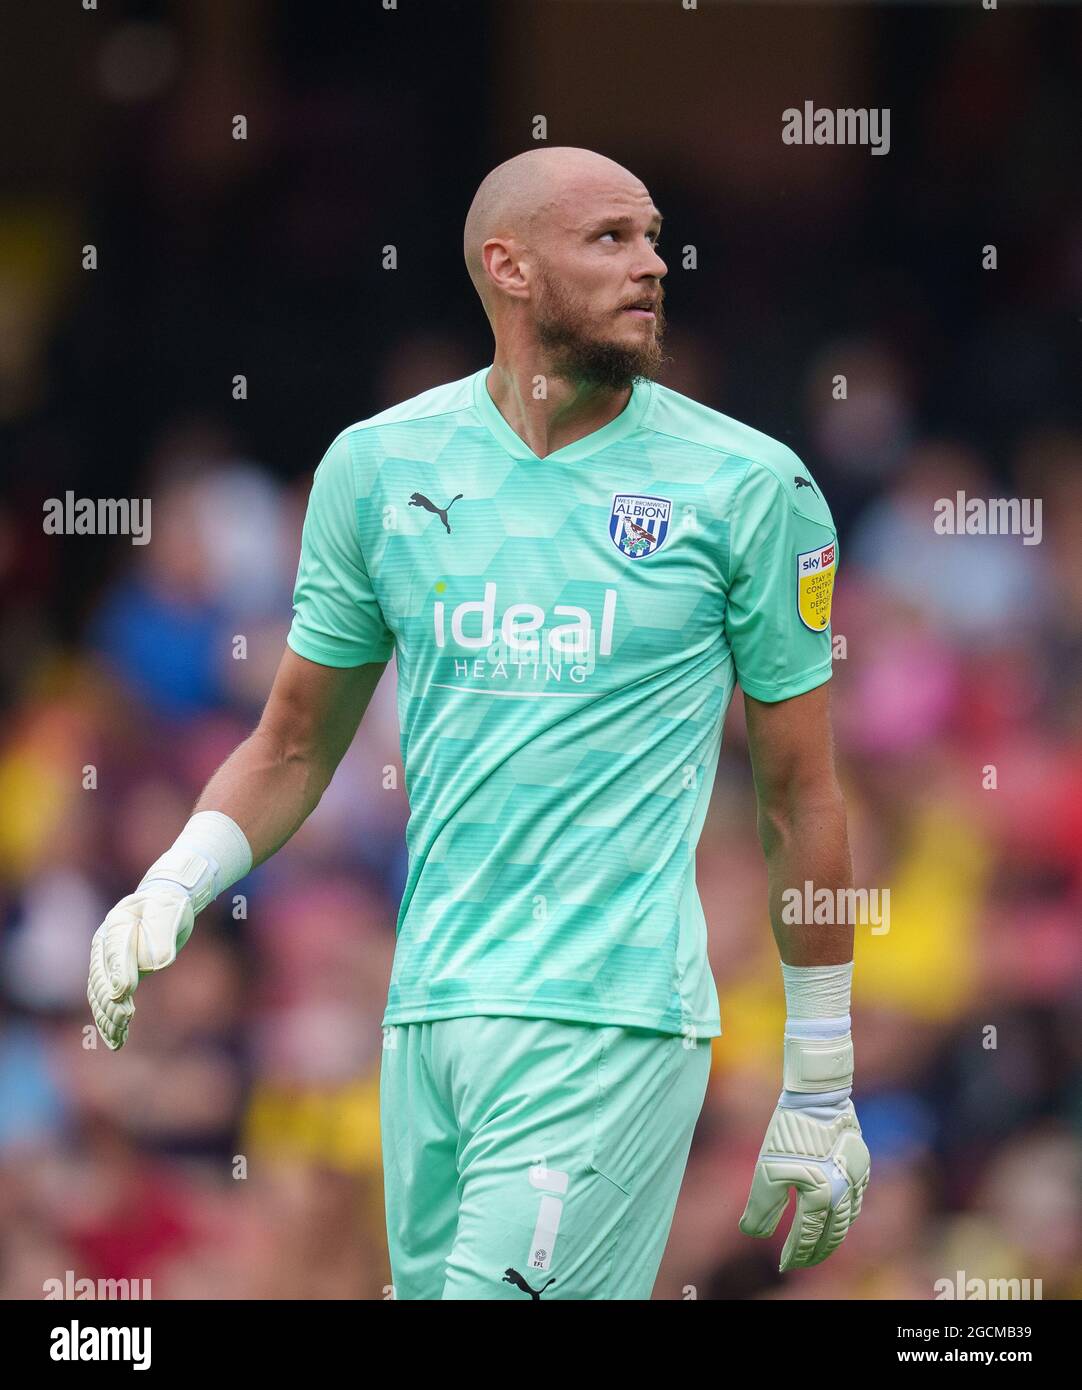 Watford, UK. 24th July, 2021. Goalkeeper David Button of WBA during the 2021/22 Pre Season Friendly match between Watford and West Bromwich Albion at Vicarage Road, Watford, England on 24 July 2021. Photo by Andy Rowland. Credit: PRiME Media Images/Alamy Live News Stock Photo